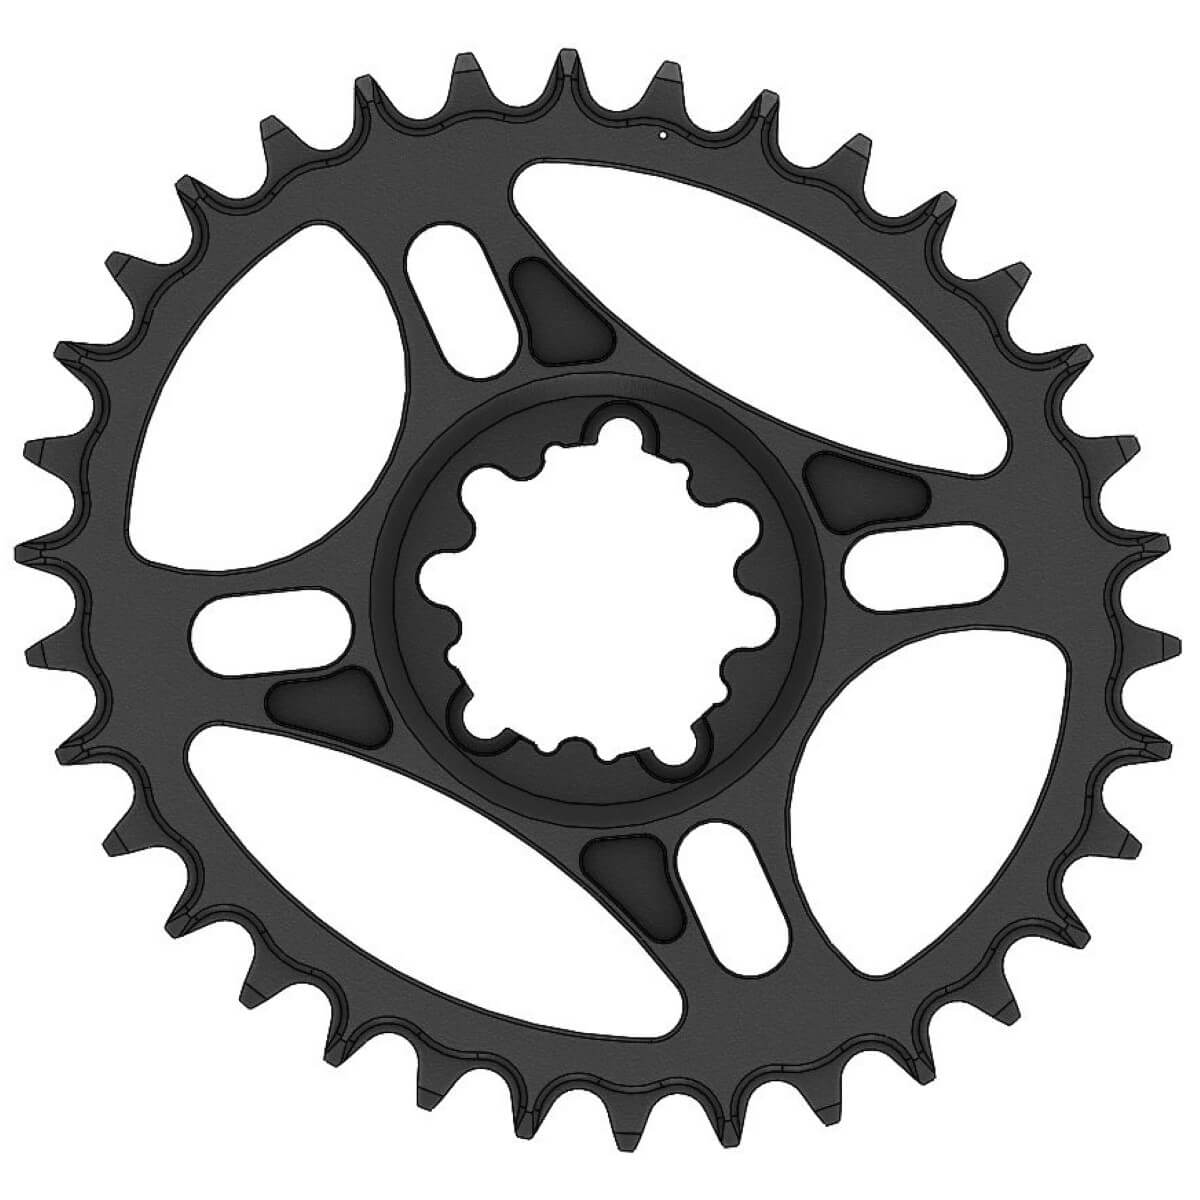 Pilo C60 Chainring Elliptic Narrow Wide 34T for Sram direct dub. Offset: 3 mm.  Hyperglide+ Compatible